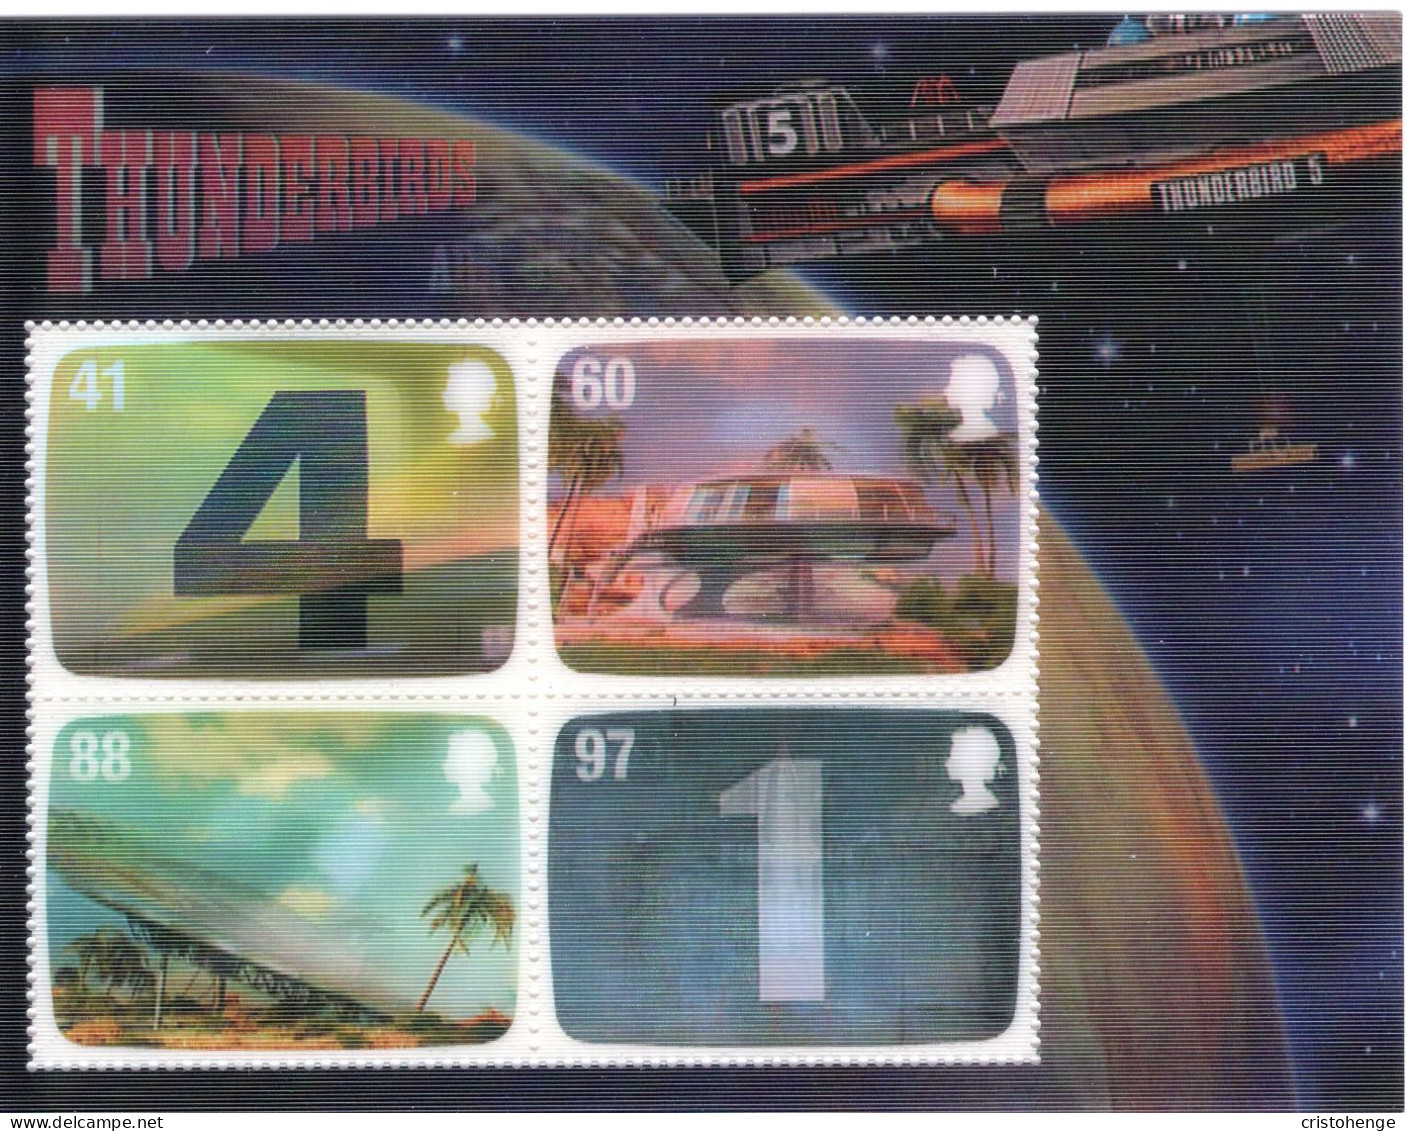 Great Britain 2011 Thunderbirds - Lenticular MS MNH (SG MS3142) - Unused Stamps